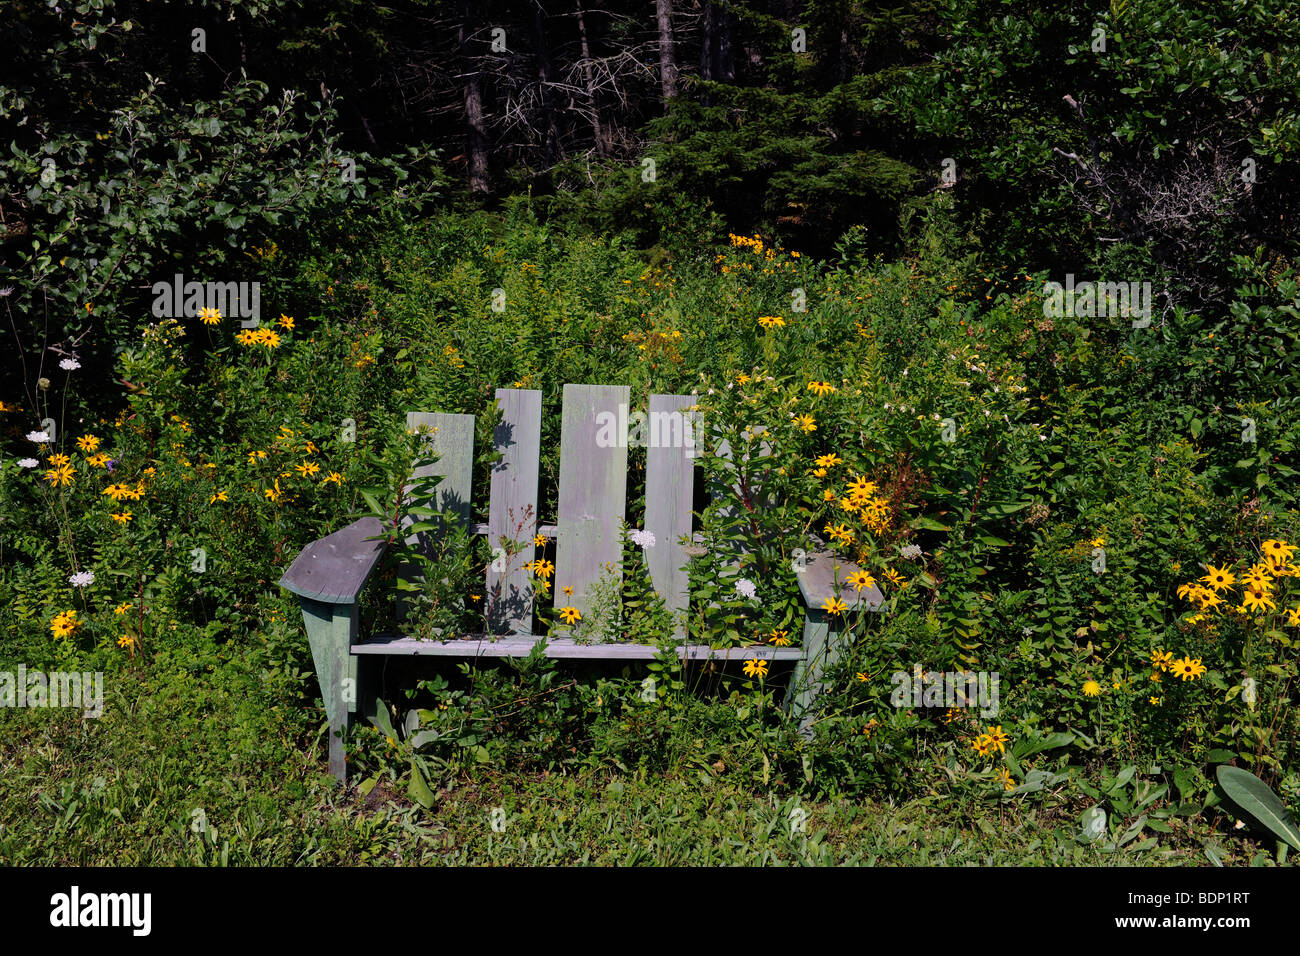 Barnes Island, Maine coast. Wooden chair, overgrown with weeds and flowers. Stock Photo